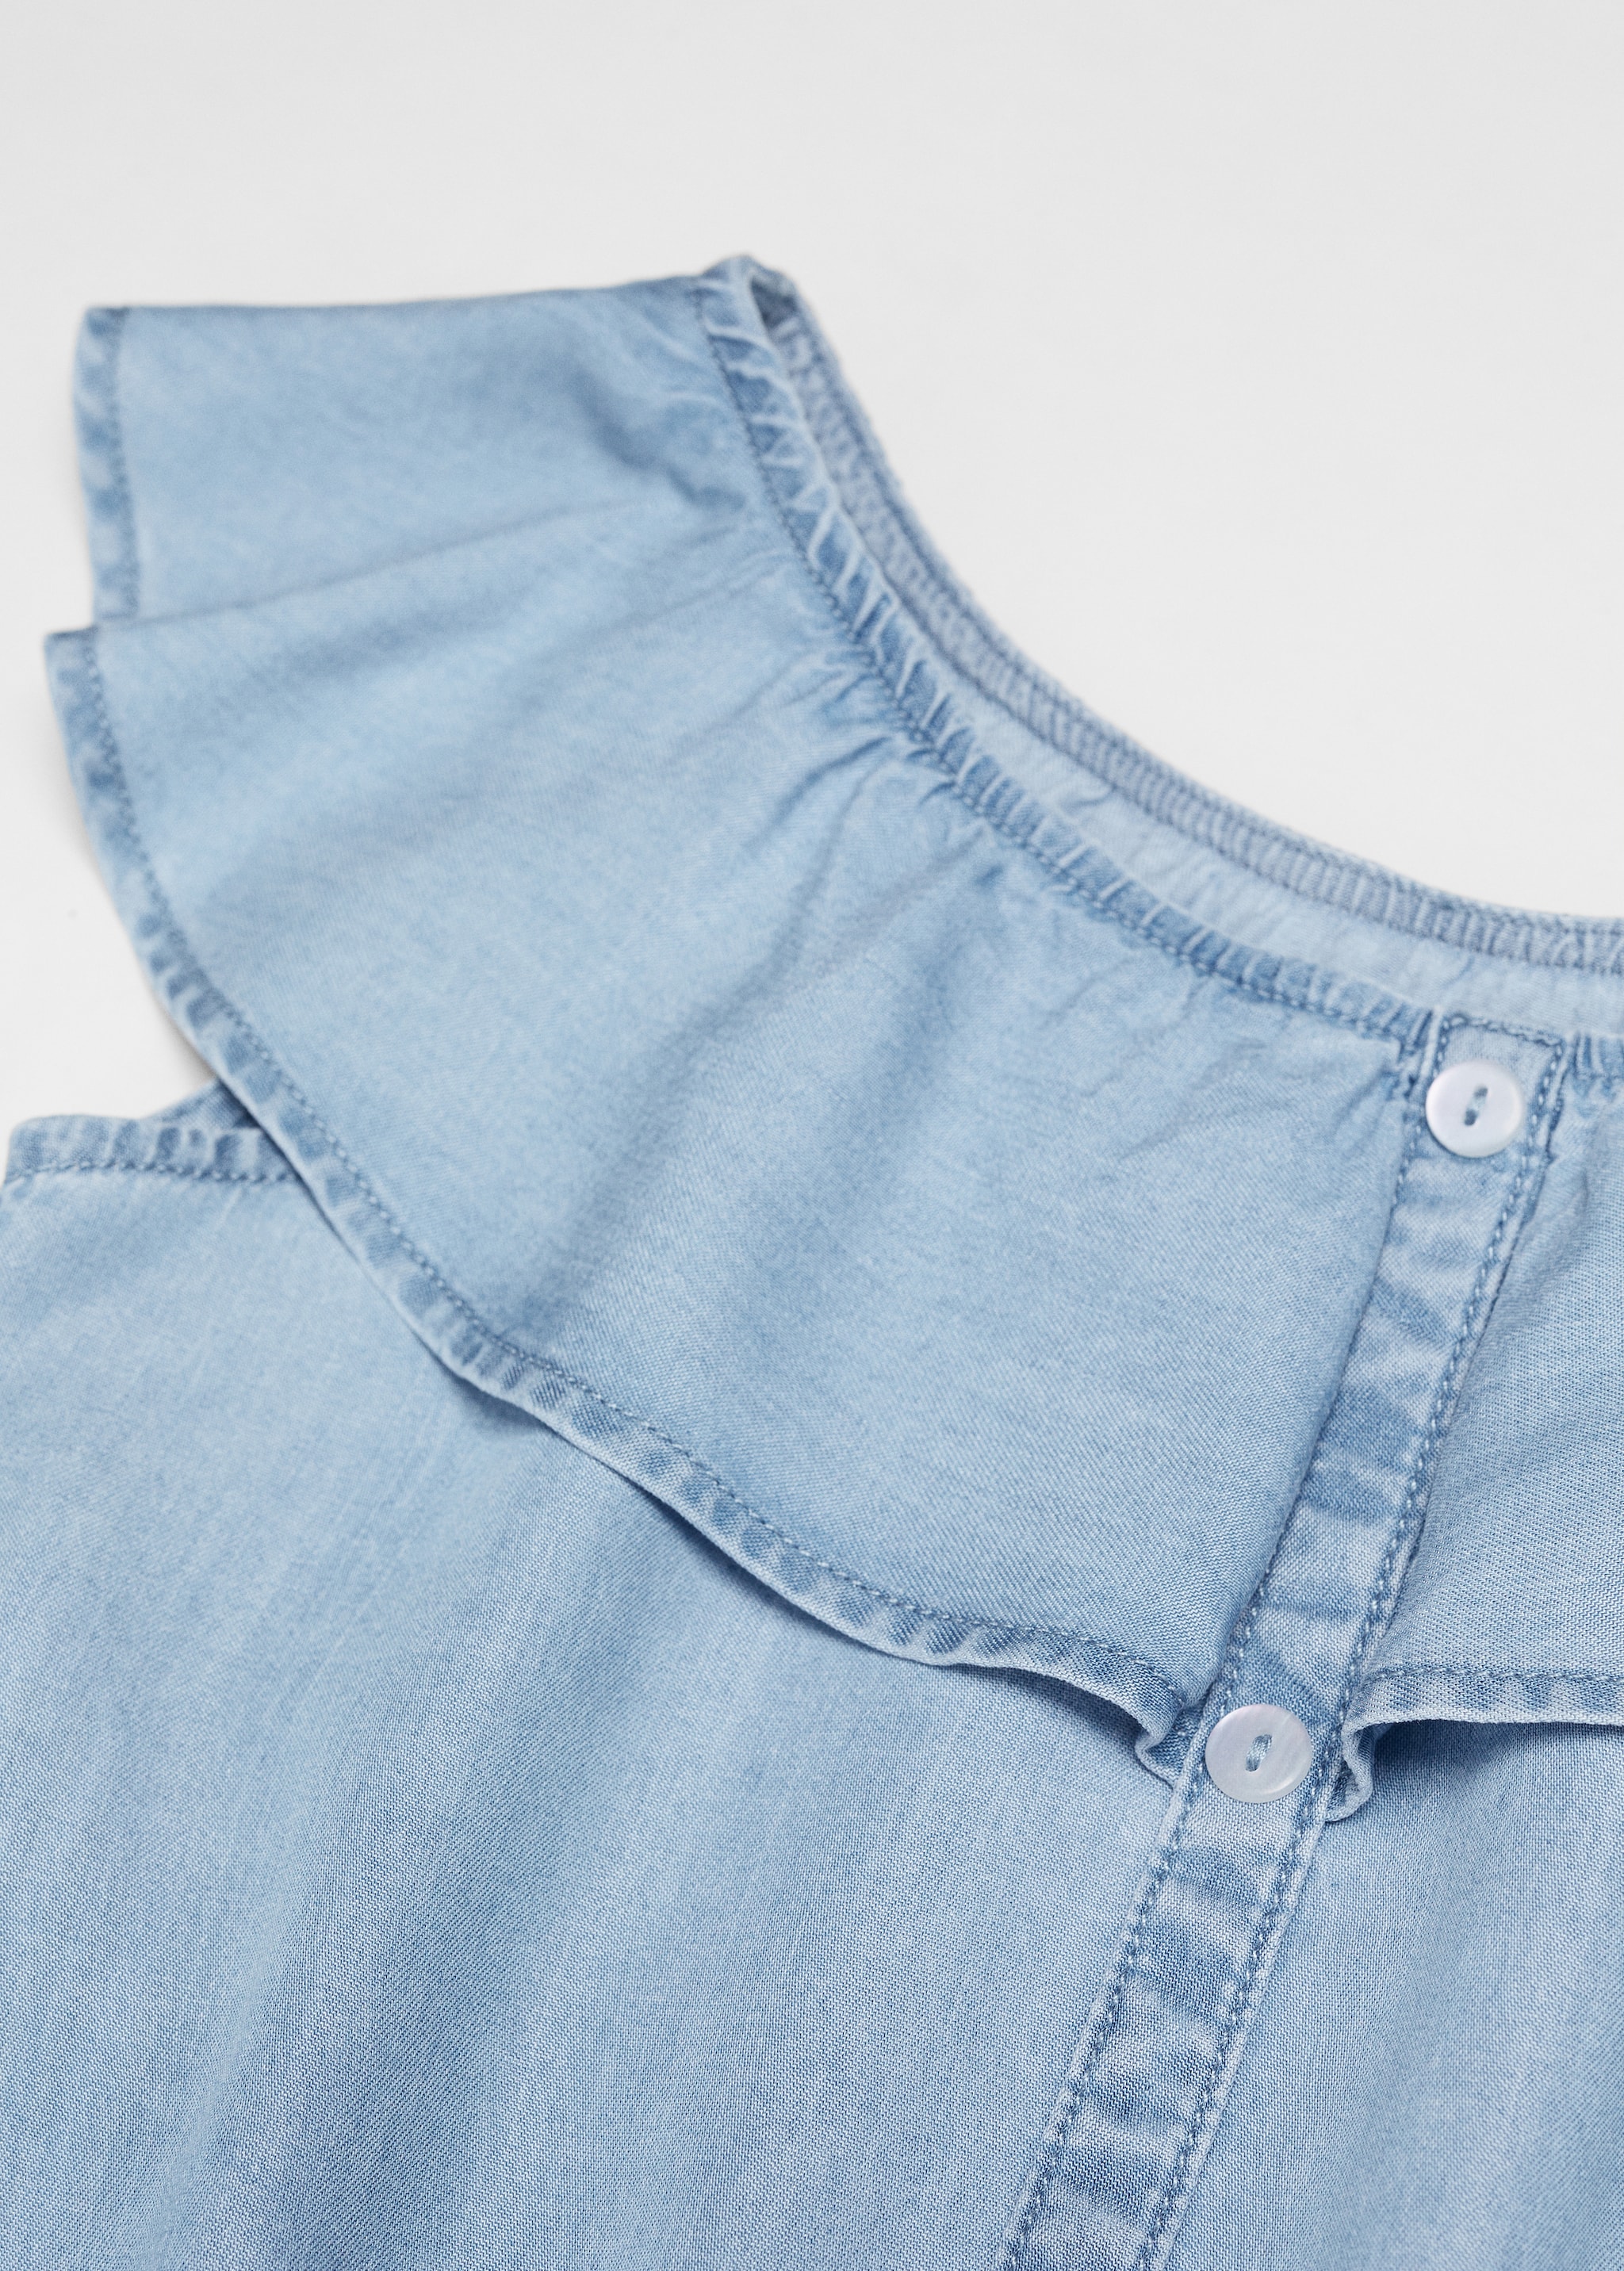 Denim blouse with buttons - Details of the article 8